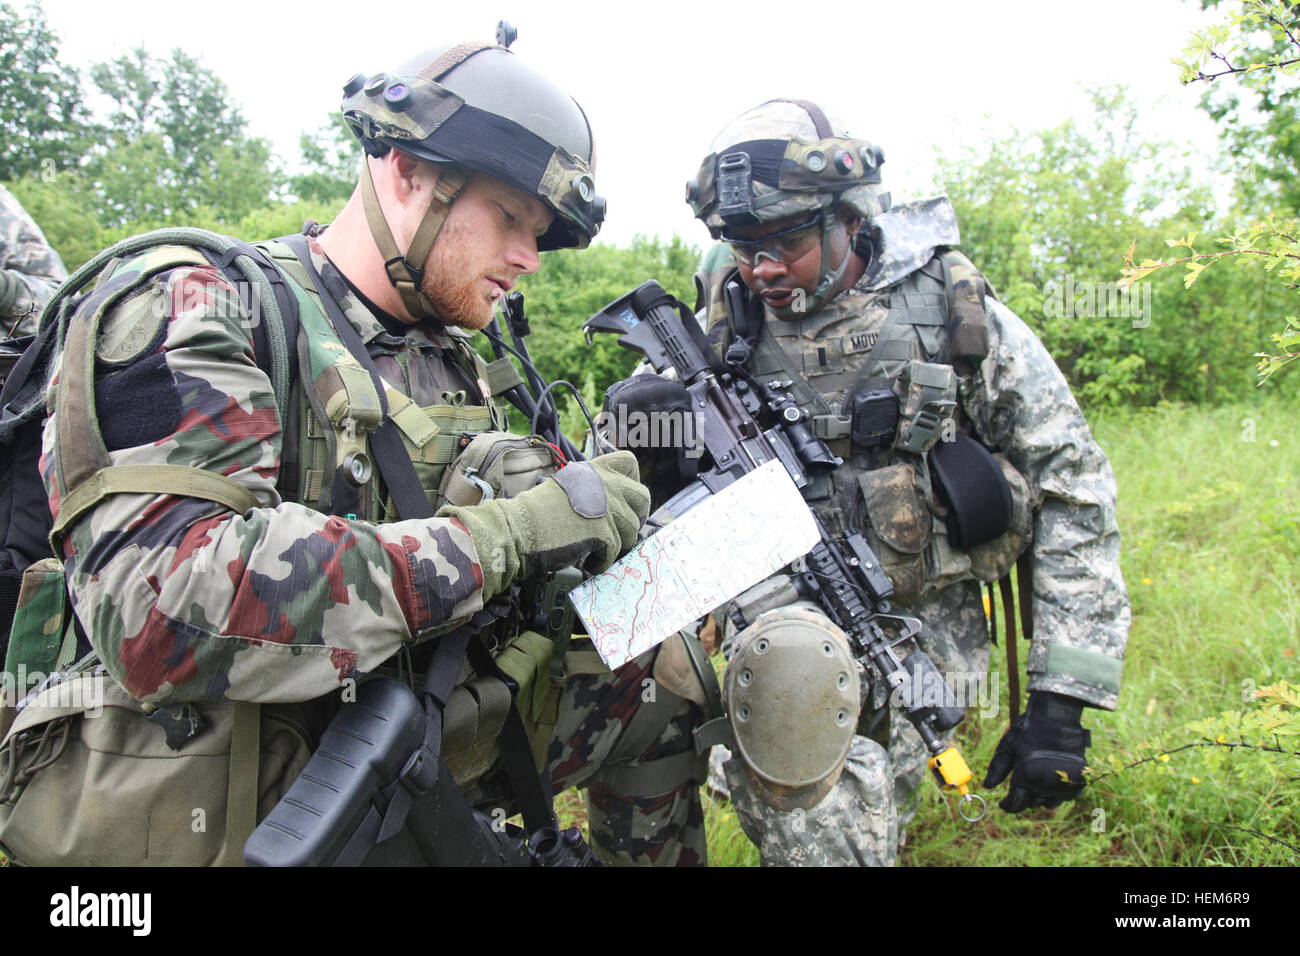 A Slovenian soldier surveys a map as he and forces from U.S. Army Europe’s 2nd Cavalry Regiment plan an assault as part of a field training exercise during the Immediate Response 2012 (IR12) training event held in Slunj, Croatia on Tuesday, June 5, 2012.  IR12 is a multinational tactical field training exercise that will involve more than 700 personnel primarily from the U.S. Army Europe’s 2nd Cavalry Regiment and Croatian armed forces, with contingents from Albania, Bosnia-Herzegovina, Montenegro and Slovenia. Macedonia and Serbia will send observers to the exercise.  The exercise is a part o Stock Photo